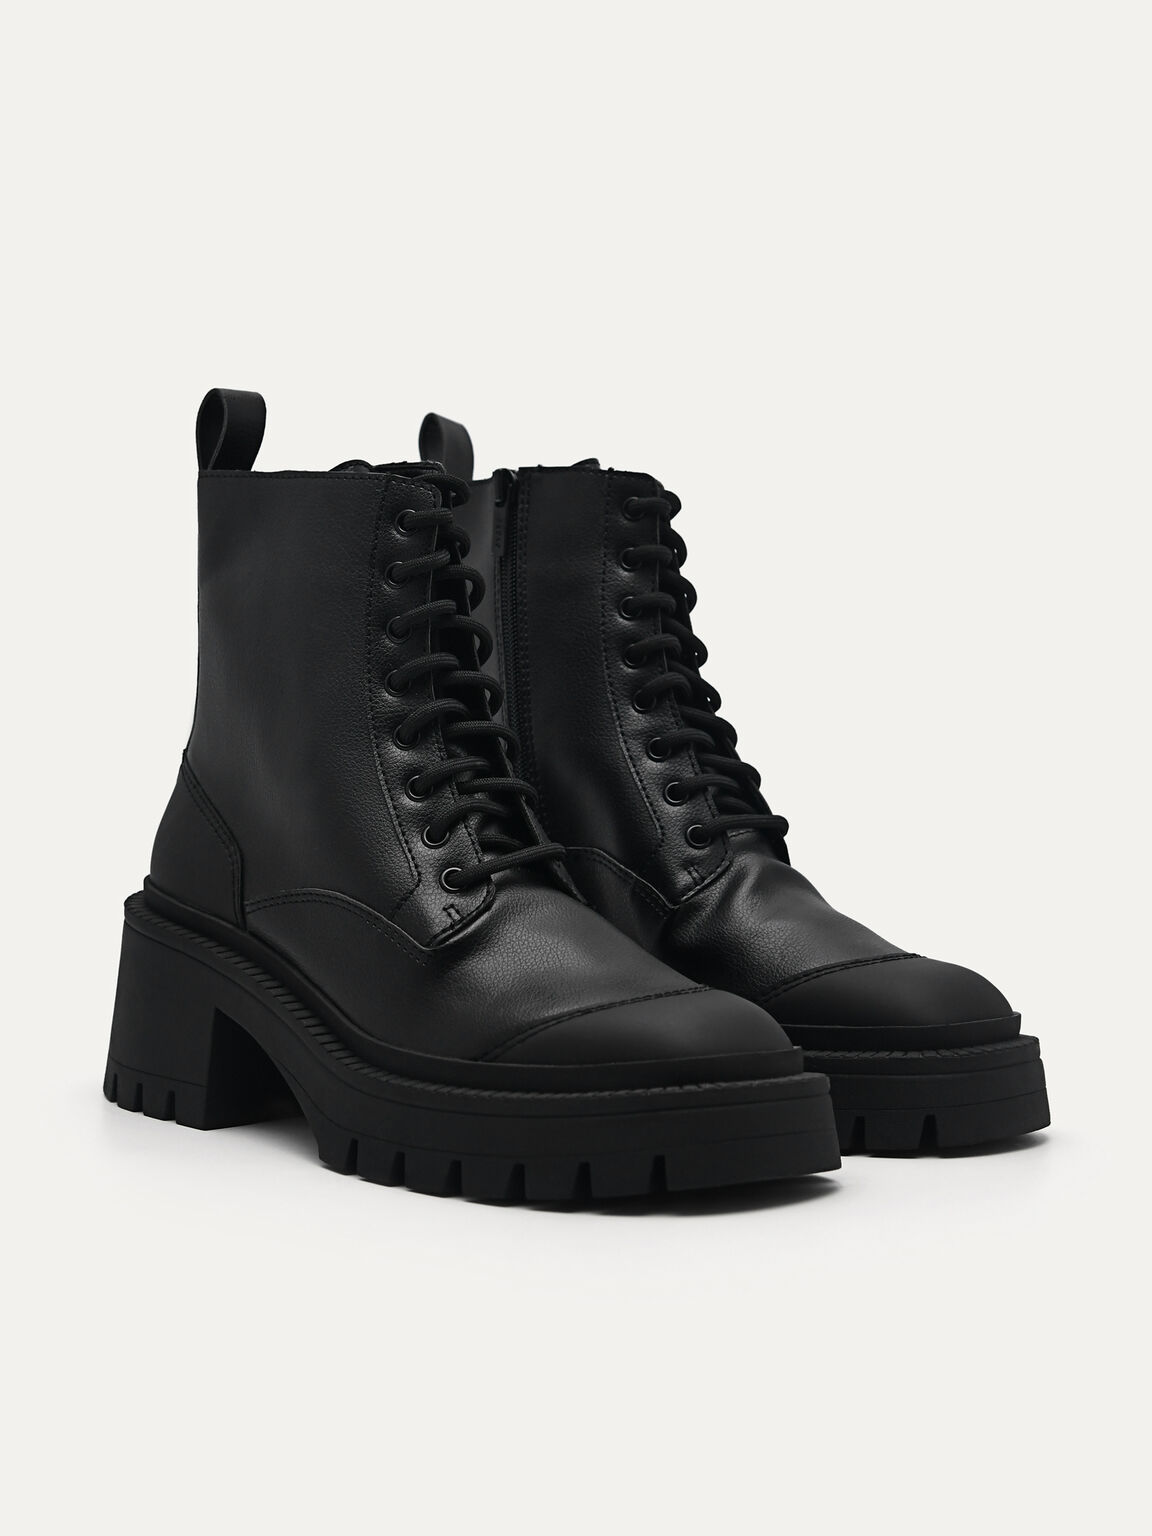 Black Berlin Ankle Boots - PEDRO SG